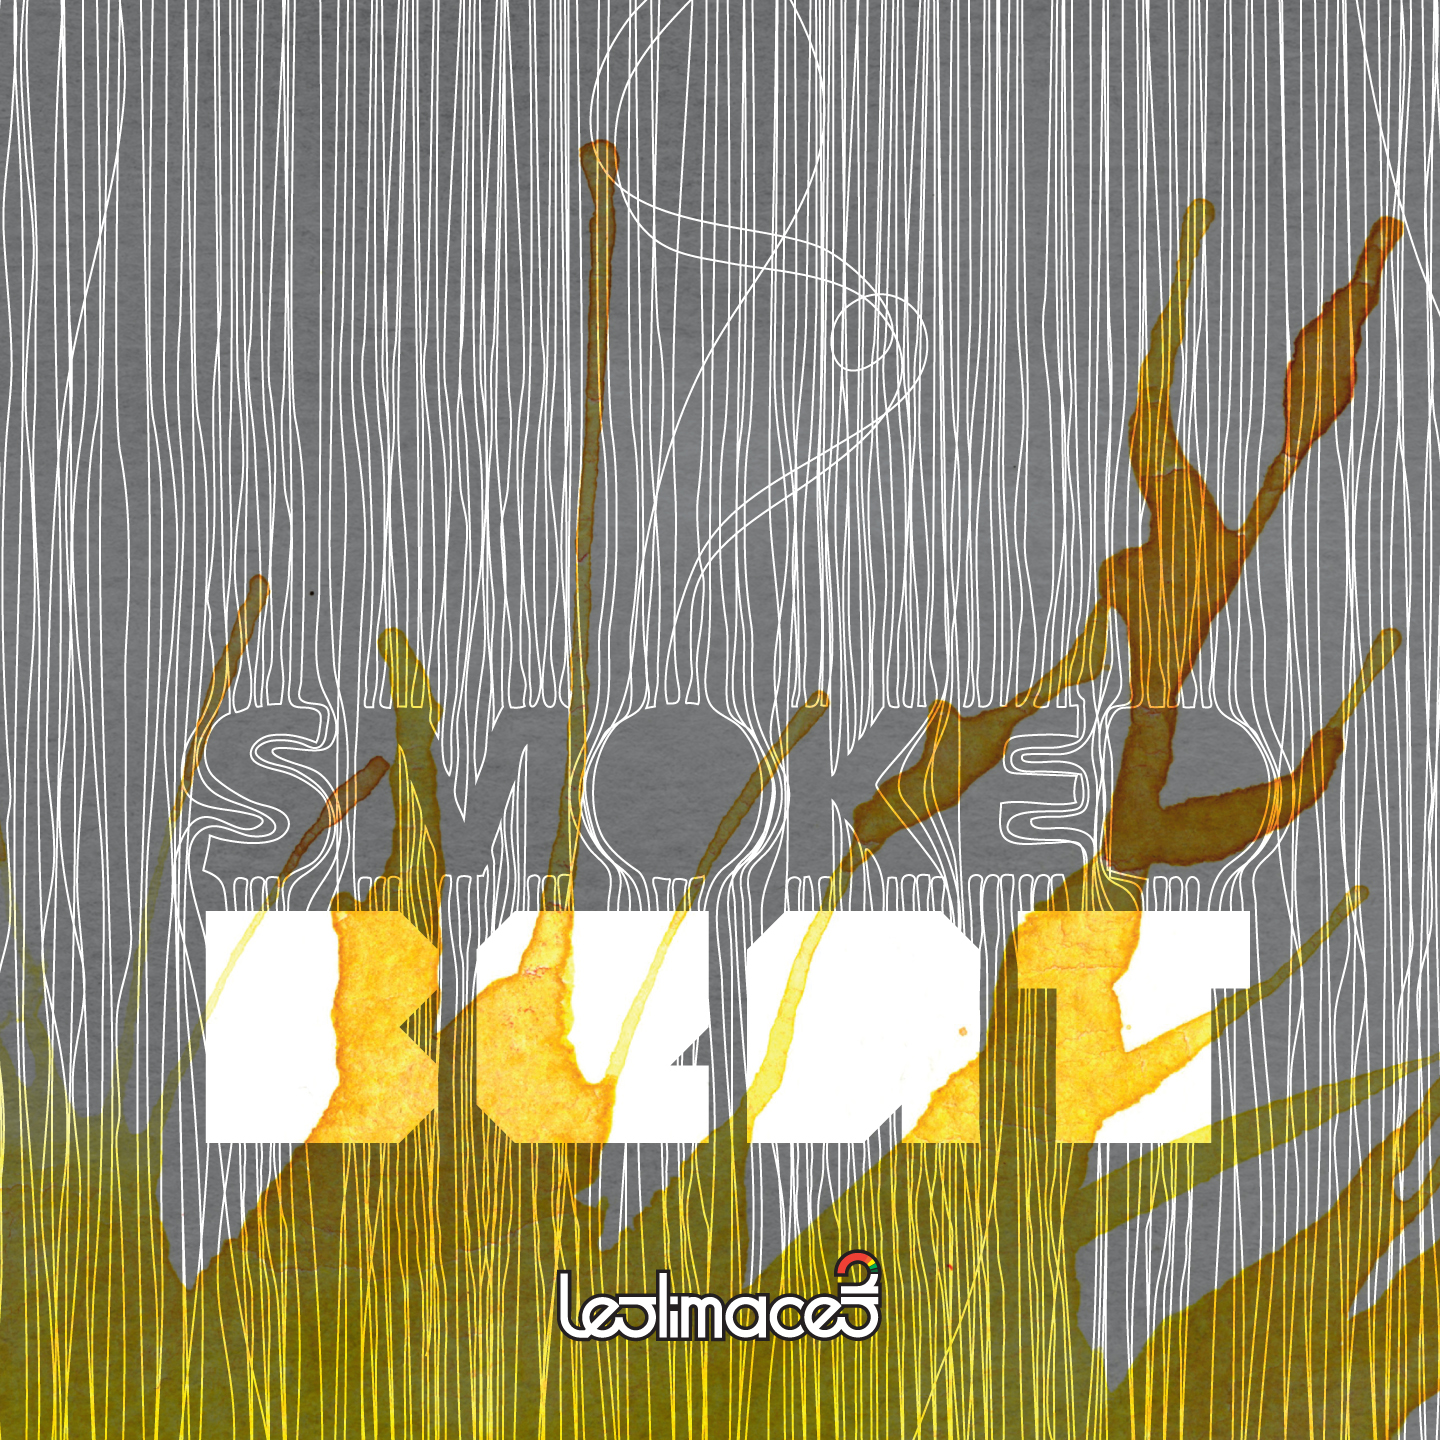 Les Limaces - Smoked Beat